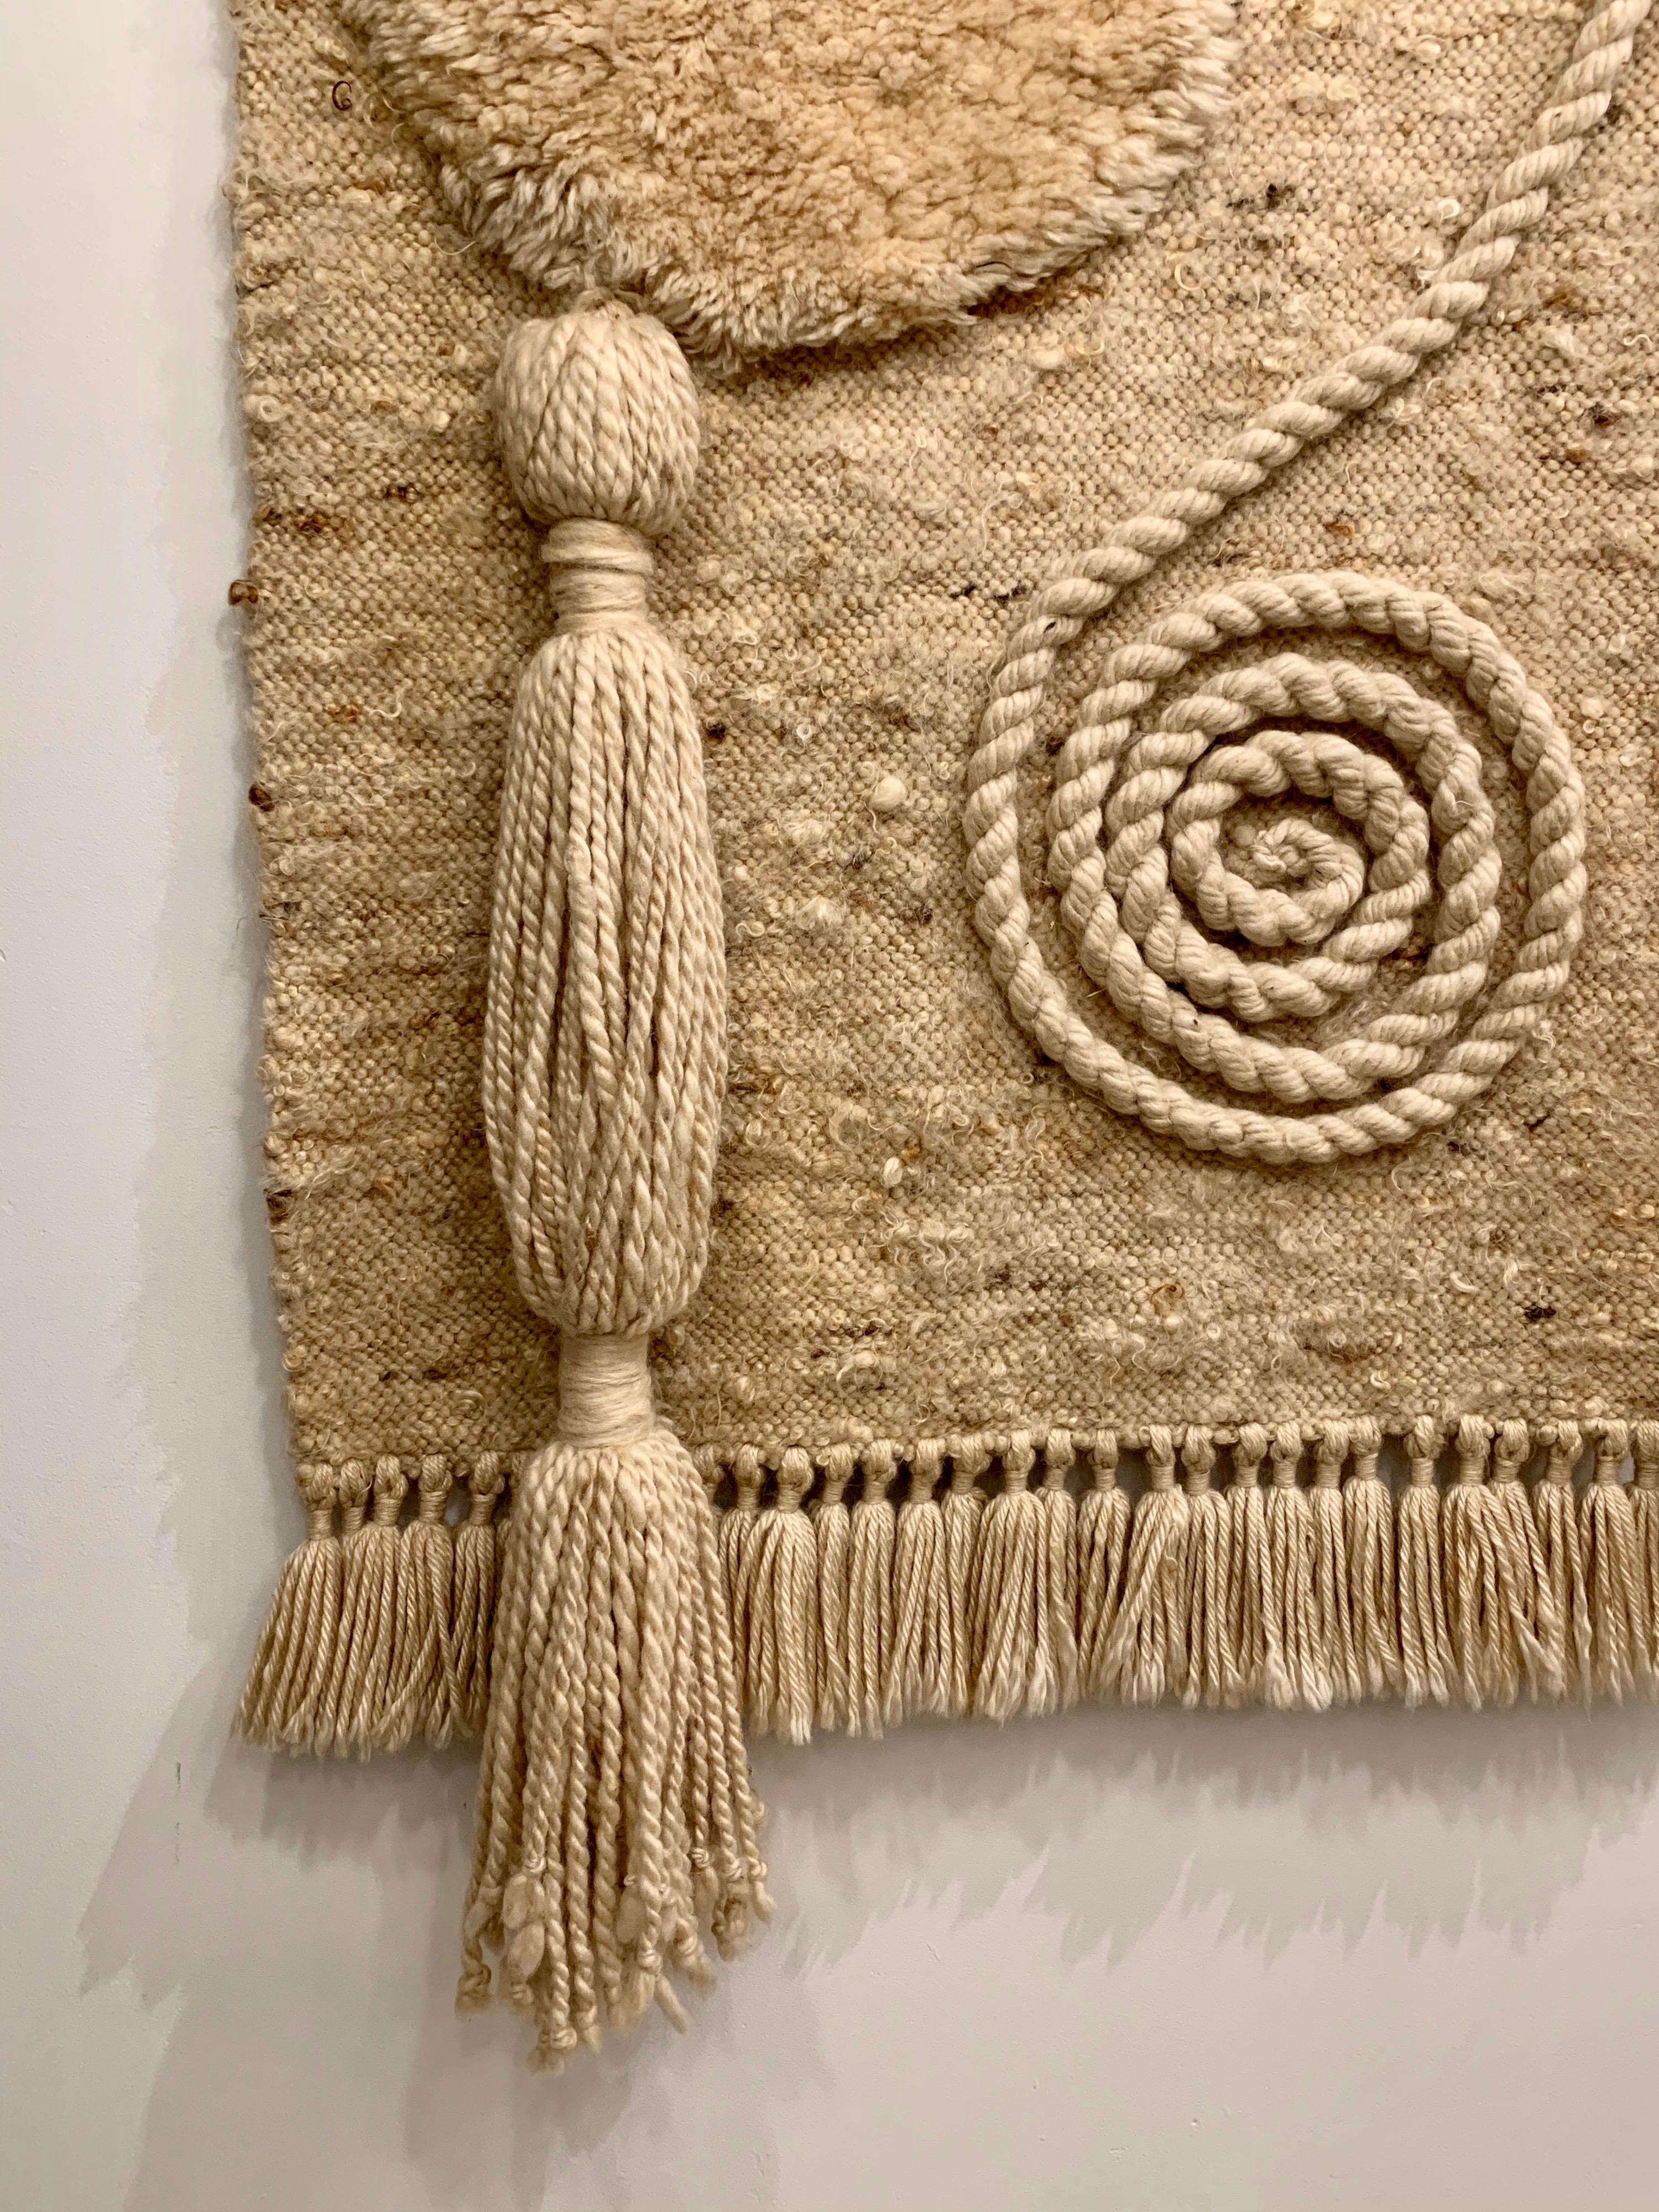 This is an outstanding handwoven wool art piece with extraordinary details and textures in 100% wool (earth tones).
This oversized piece is mounted on a custom designed metal bracket with brushed brass knobs (see detail images).  Extremely well